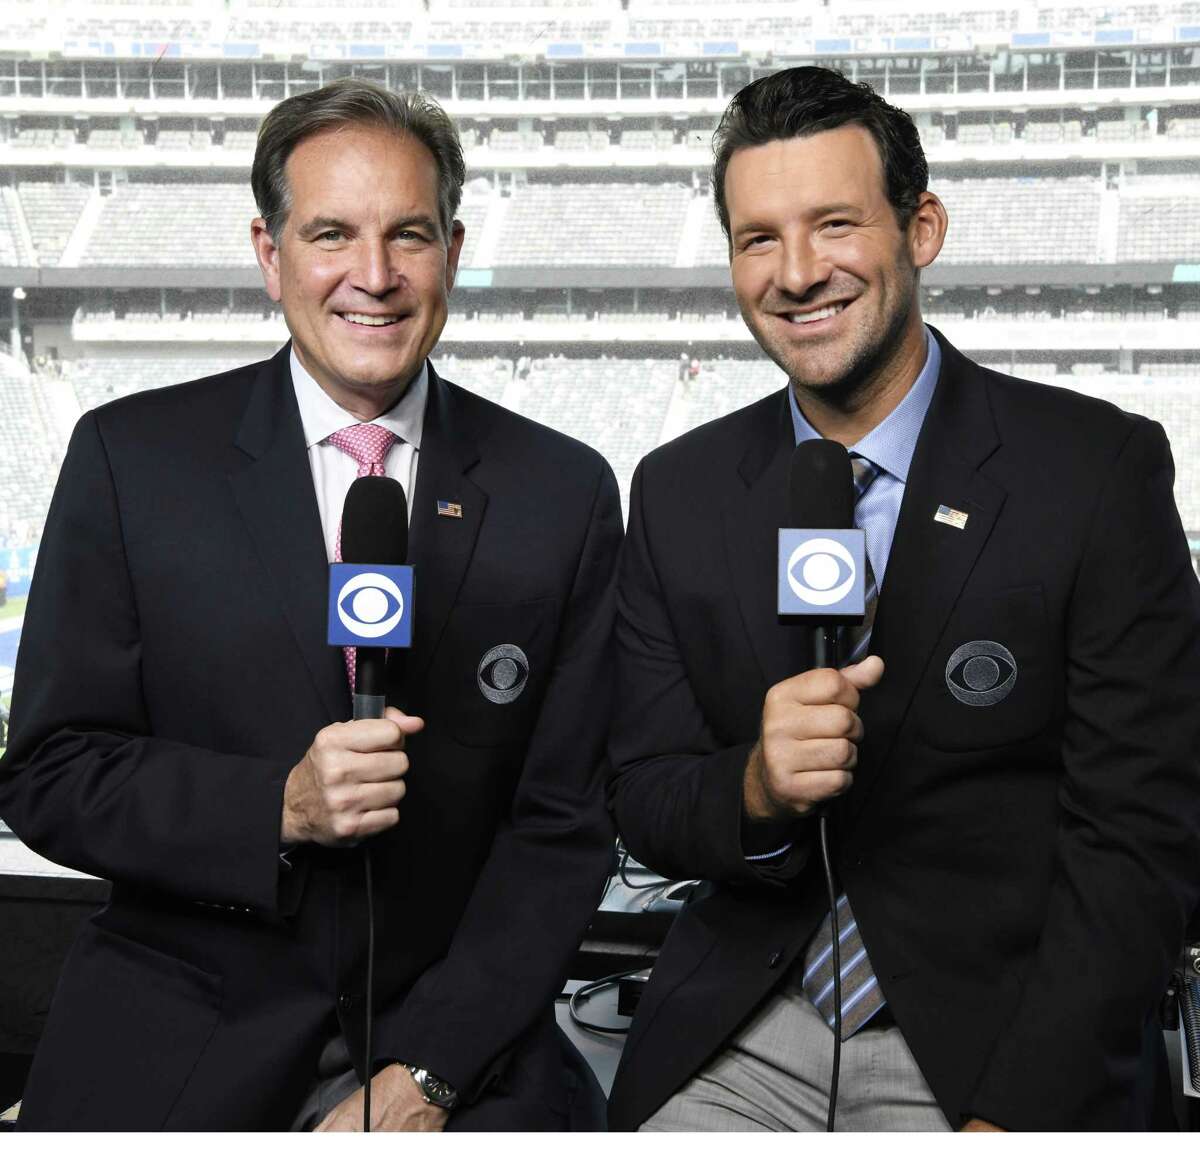 cbs nfl play by play announcers